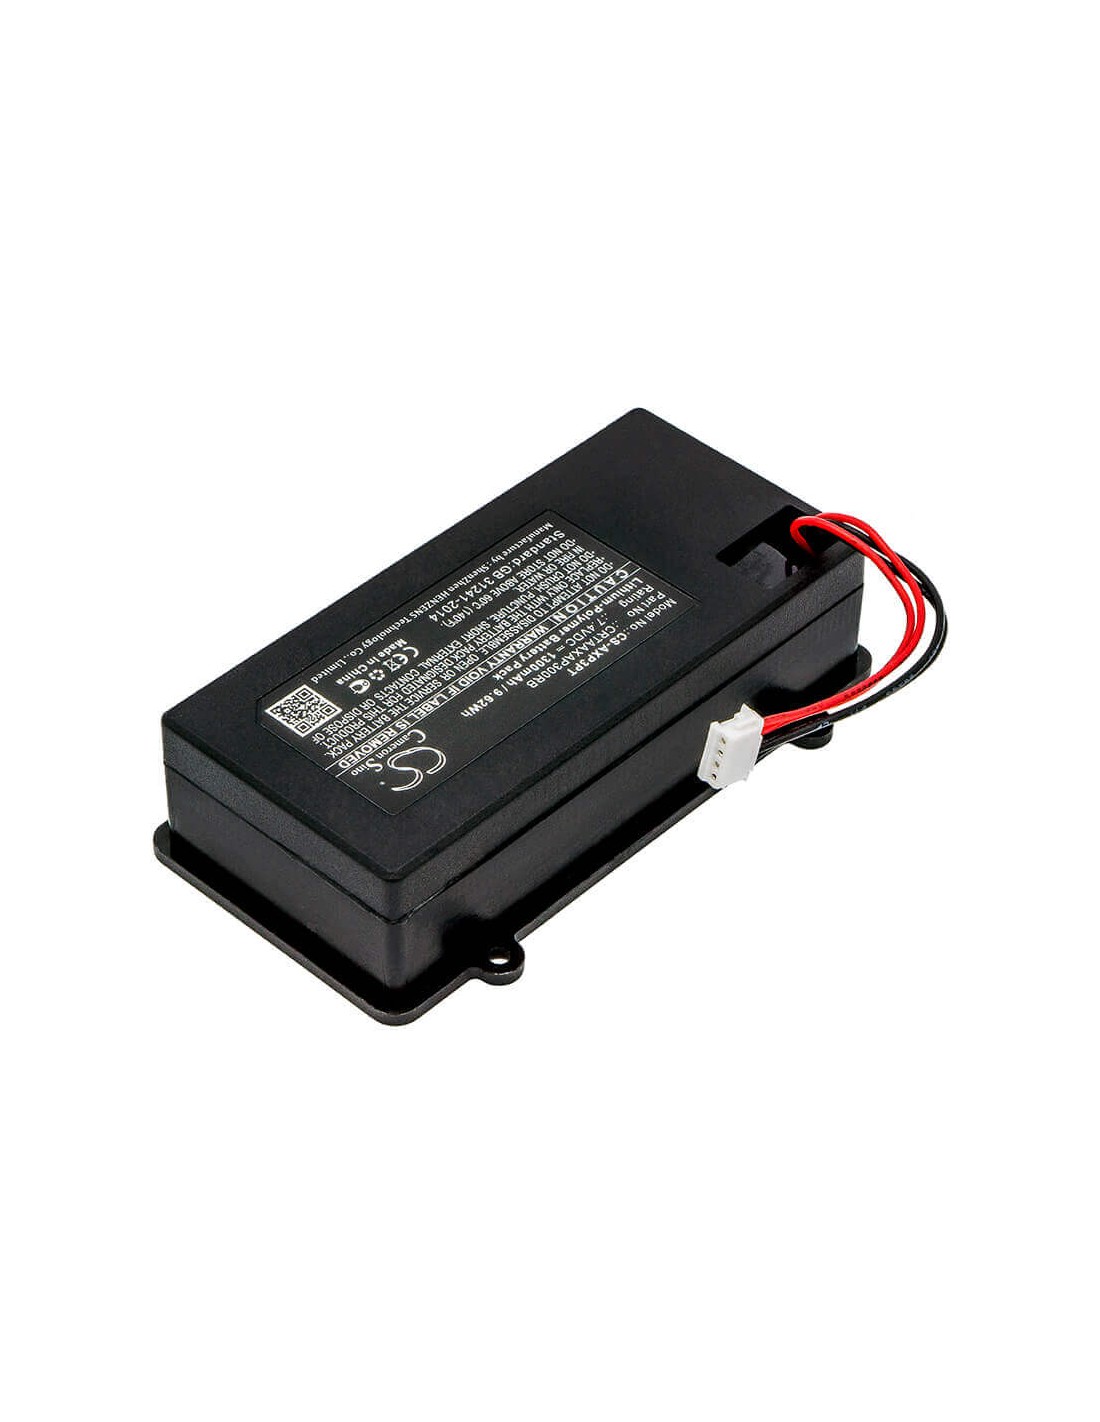 Battery for Aaxa, P300 Pico Projector 7.4V, 1300mAh - 9.62Wh